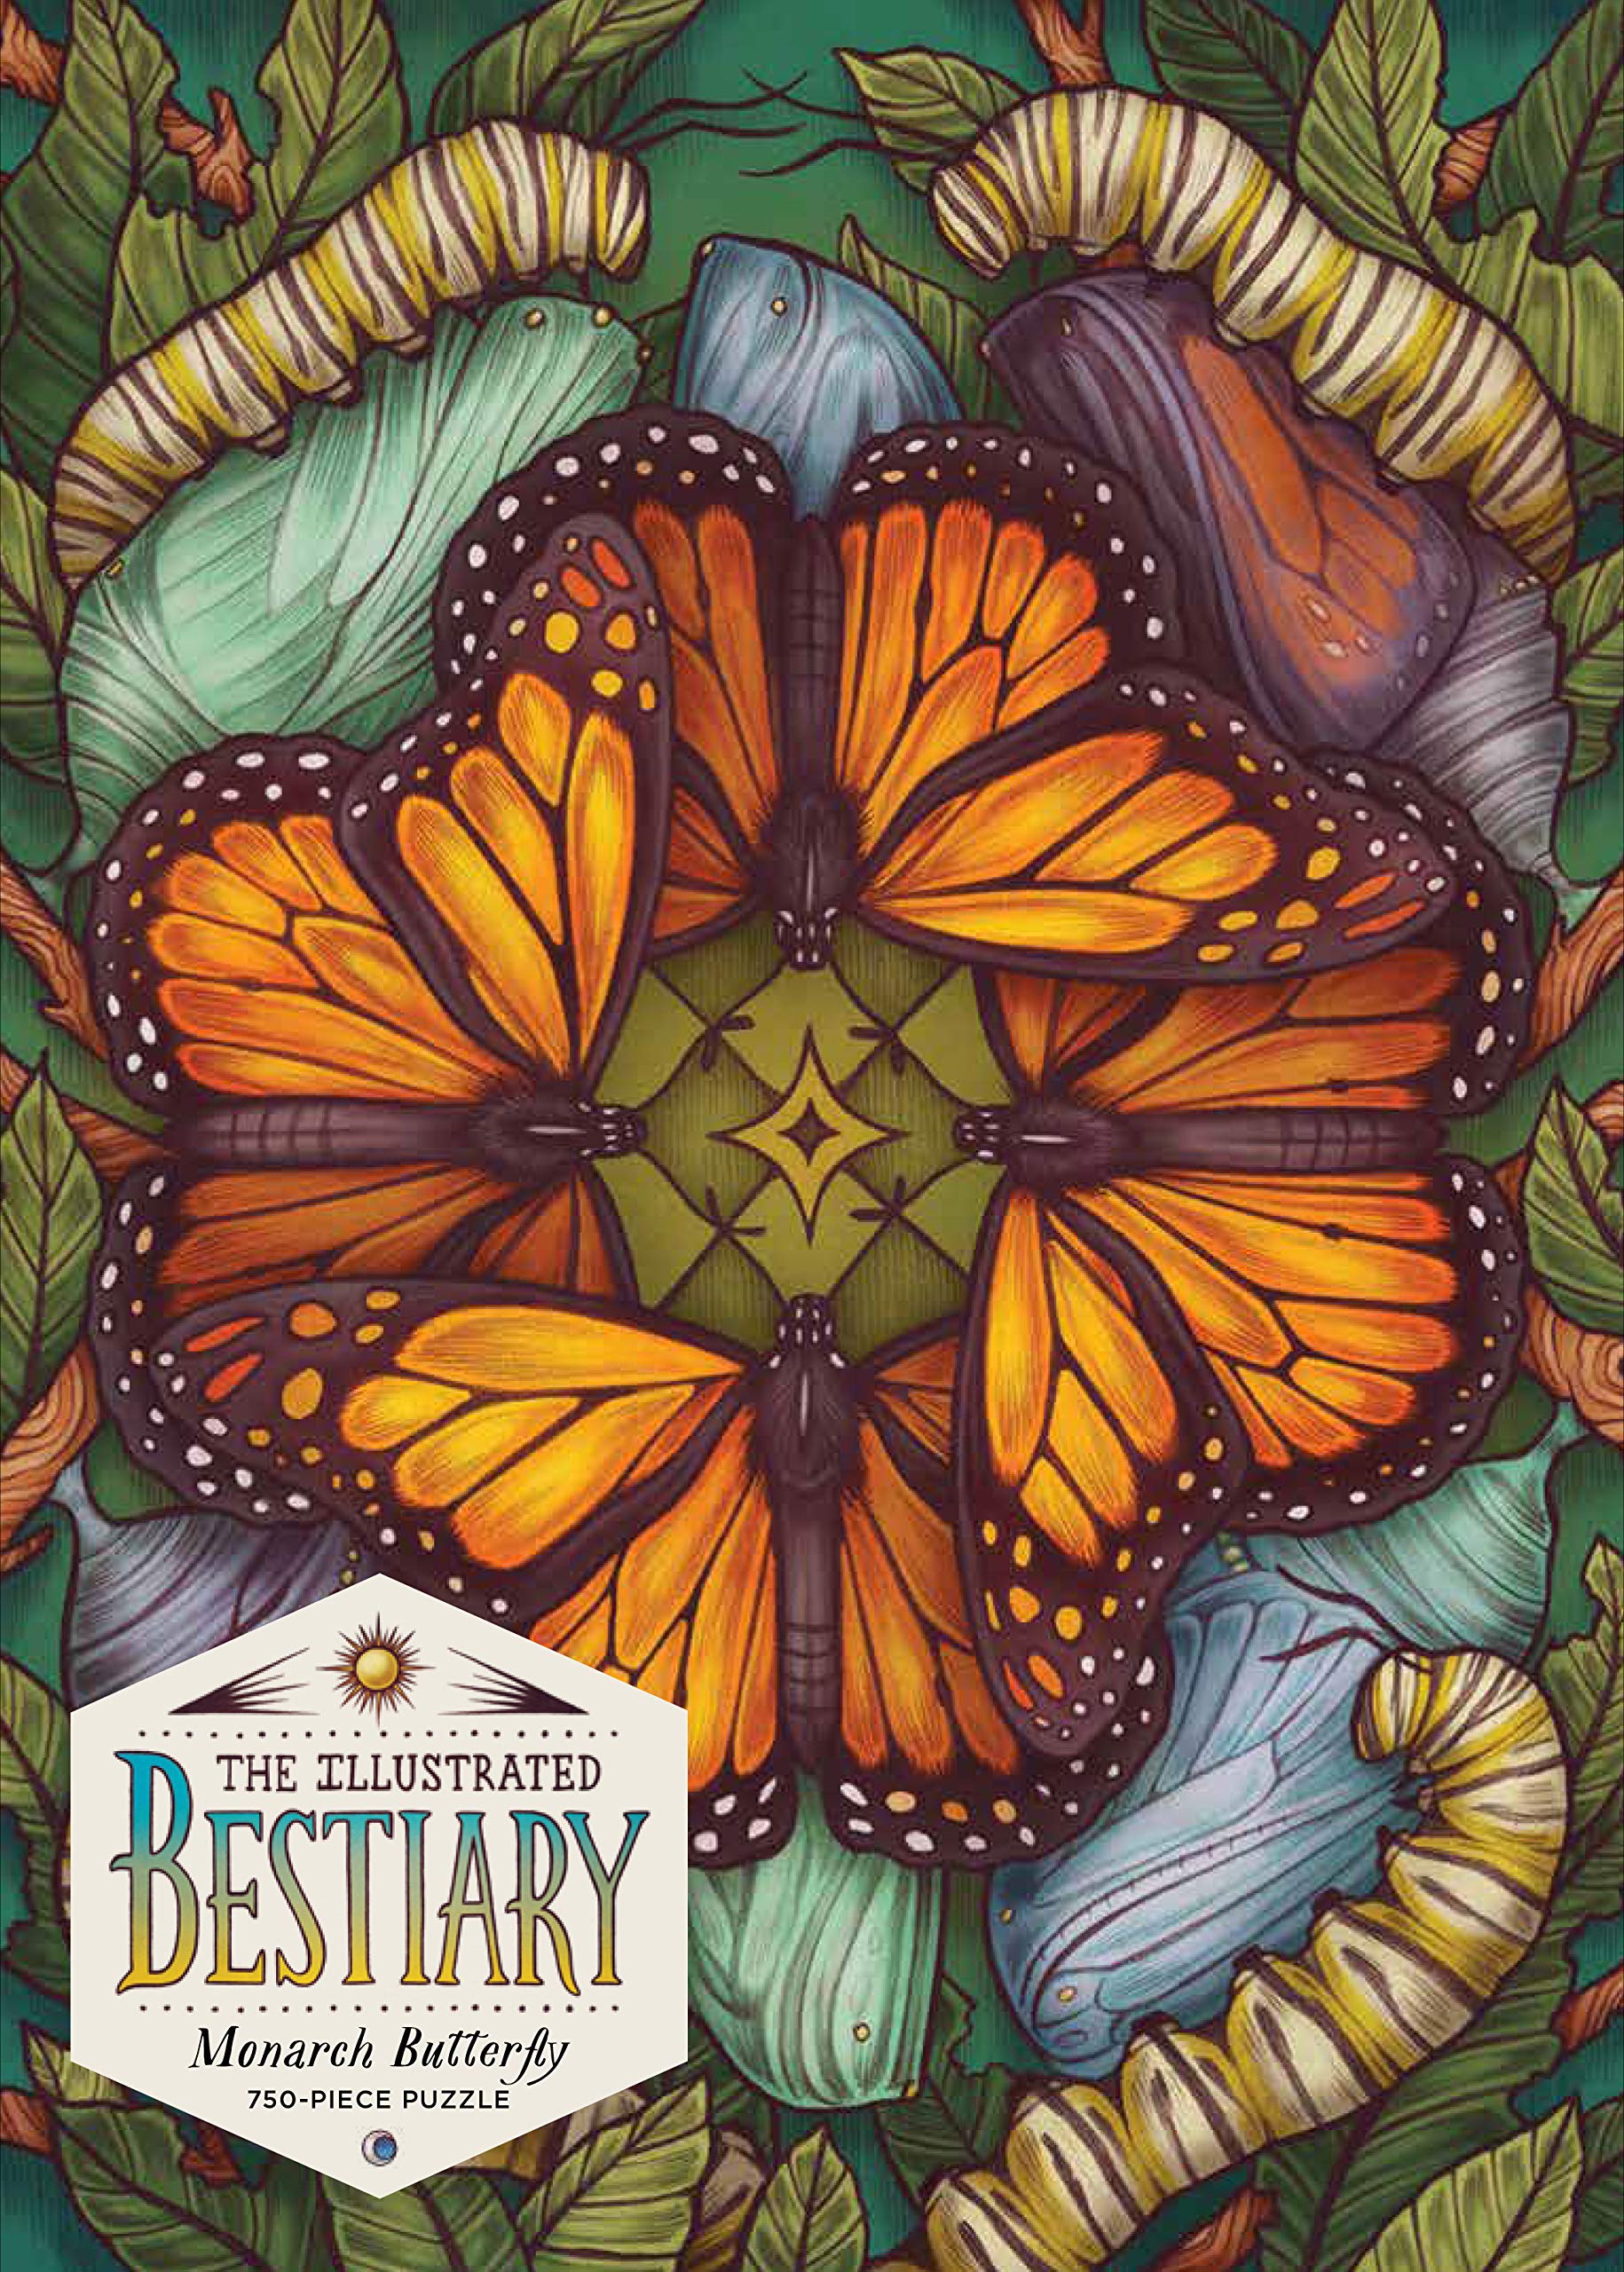 Illustrated Bestiary Puzzle: Monarch Butterfly (750 pieces) | Storey image0